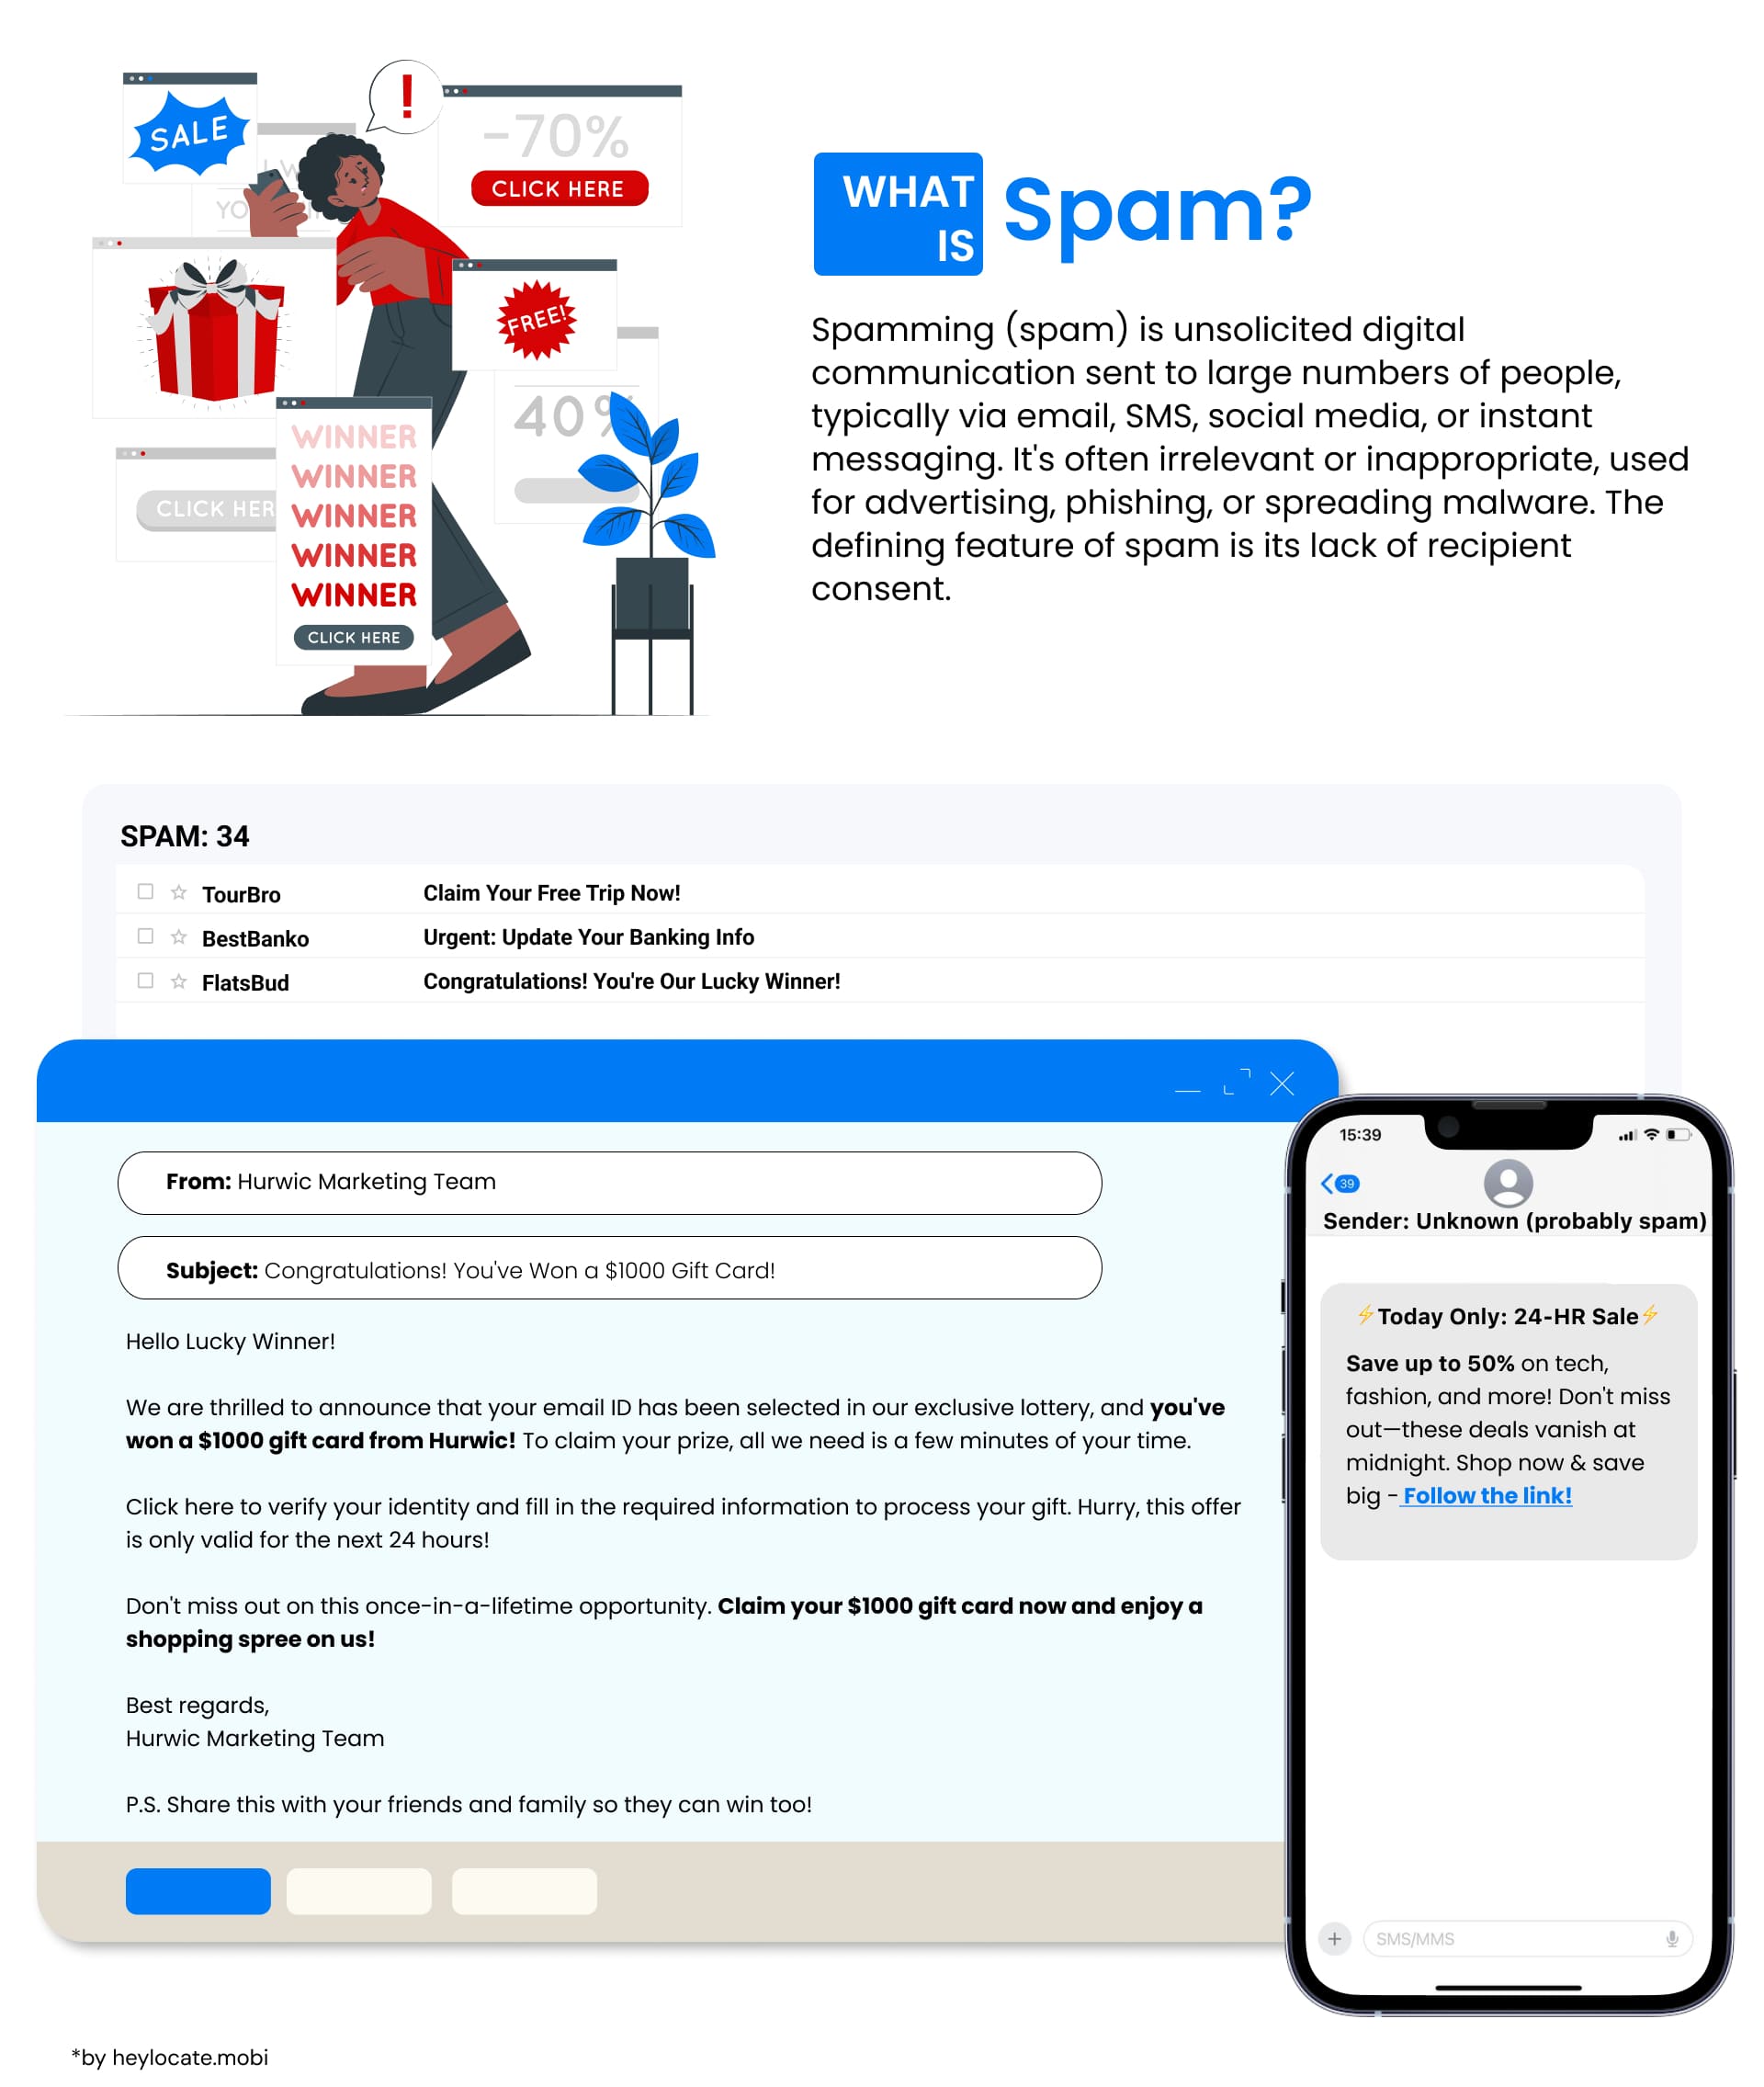 An infographic depicting various forms of spam messages and emails, highlighting their intrusive and deceptive nature